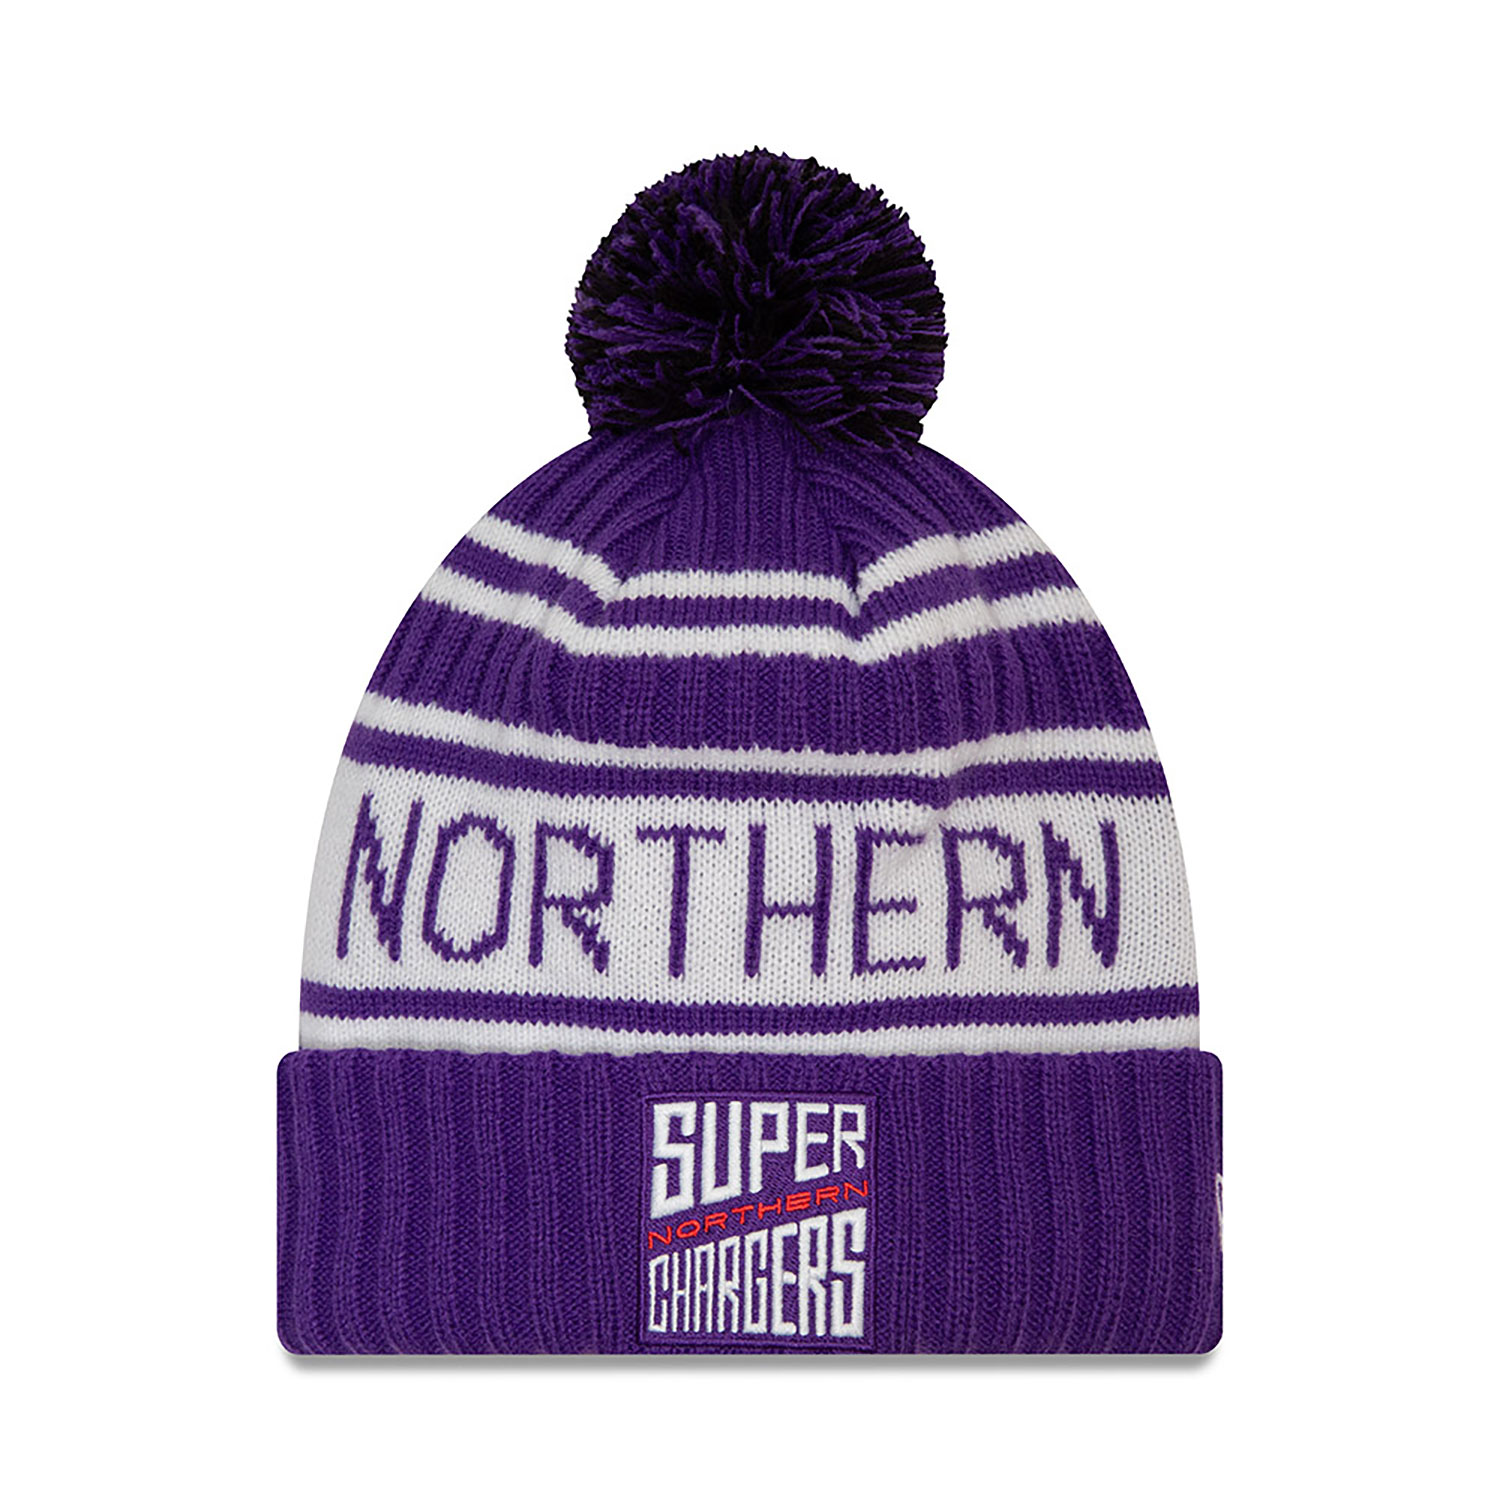 Super Northern Chargers The Hundred Purple Bobble Knit Beanie Hat